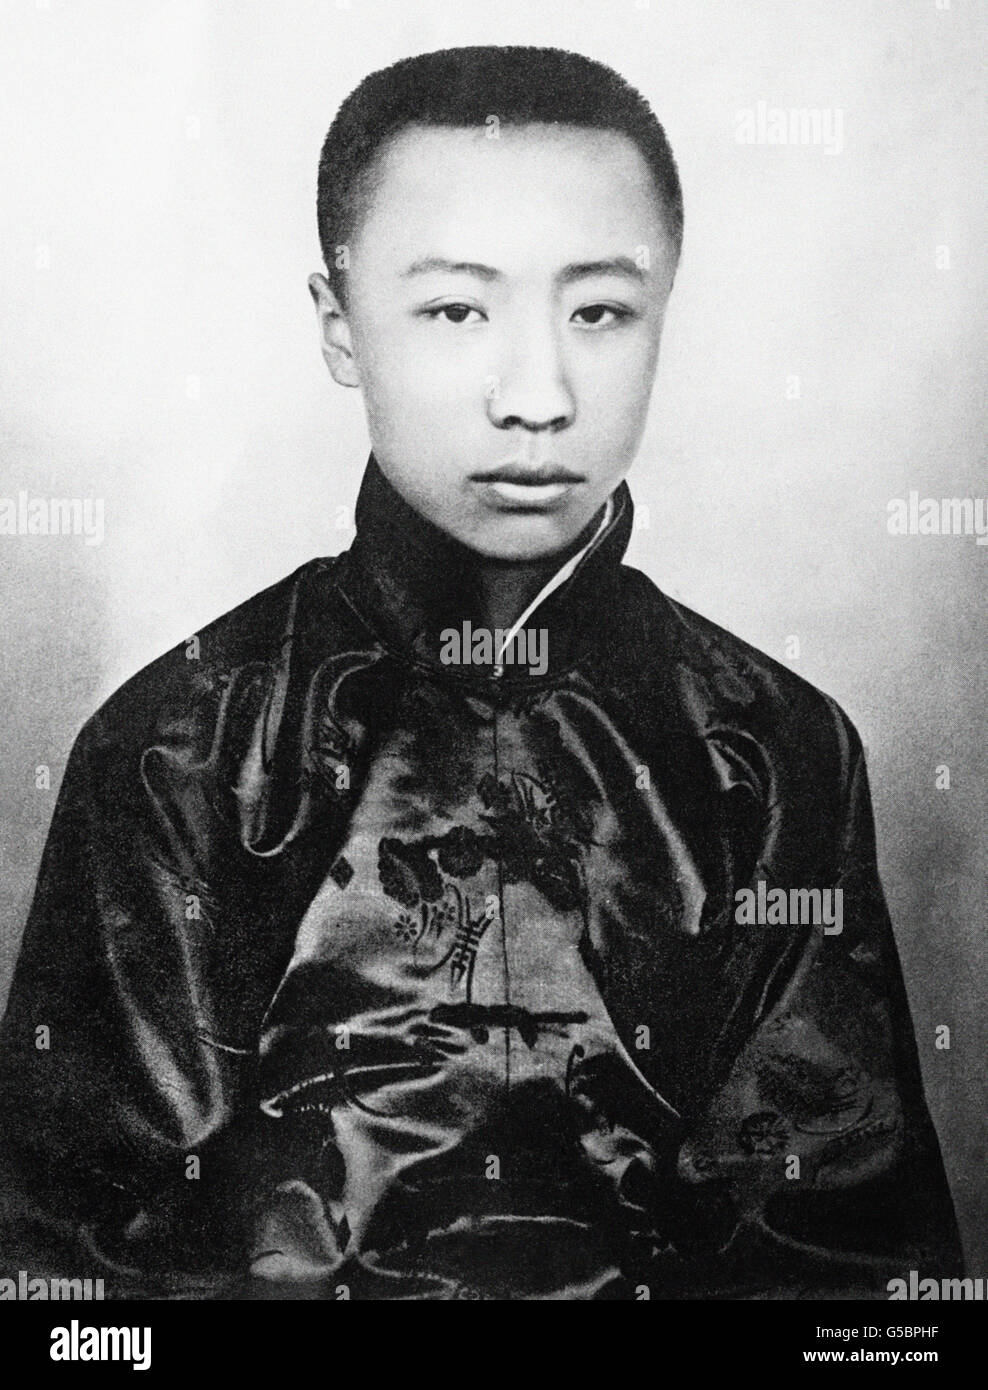 Aisin-Gioro Puyi, the former Xuantong Emperor of China, who abdicated in 1912 and still lives in Peking under the name of Henry Puyi, and is often referred to as 'The Last Emperor' seen here on his 17th birthday. Stock Photo